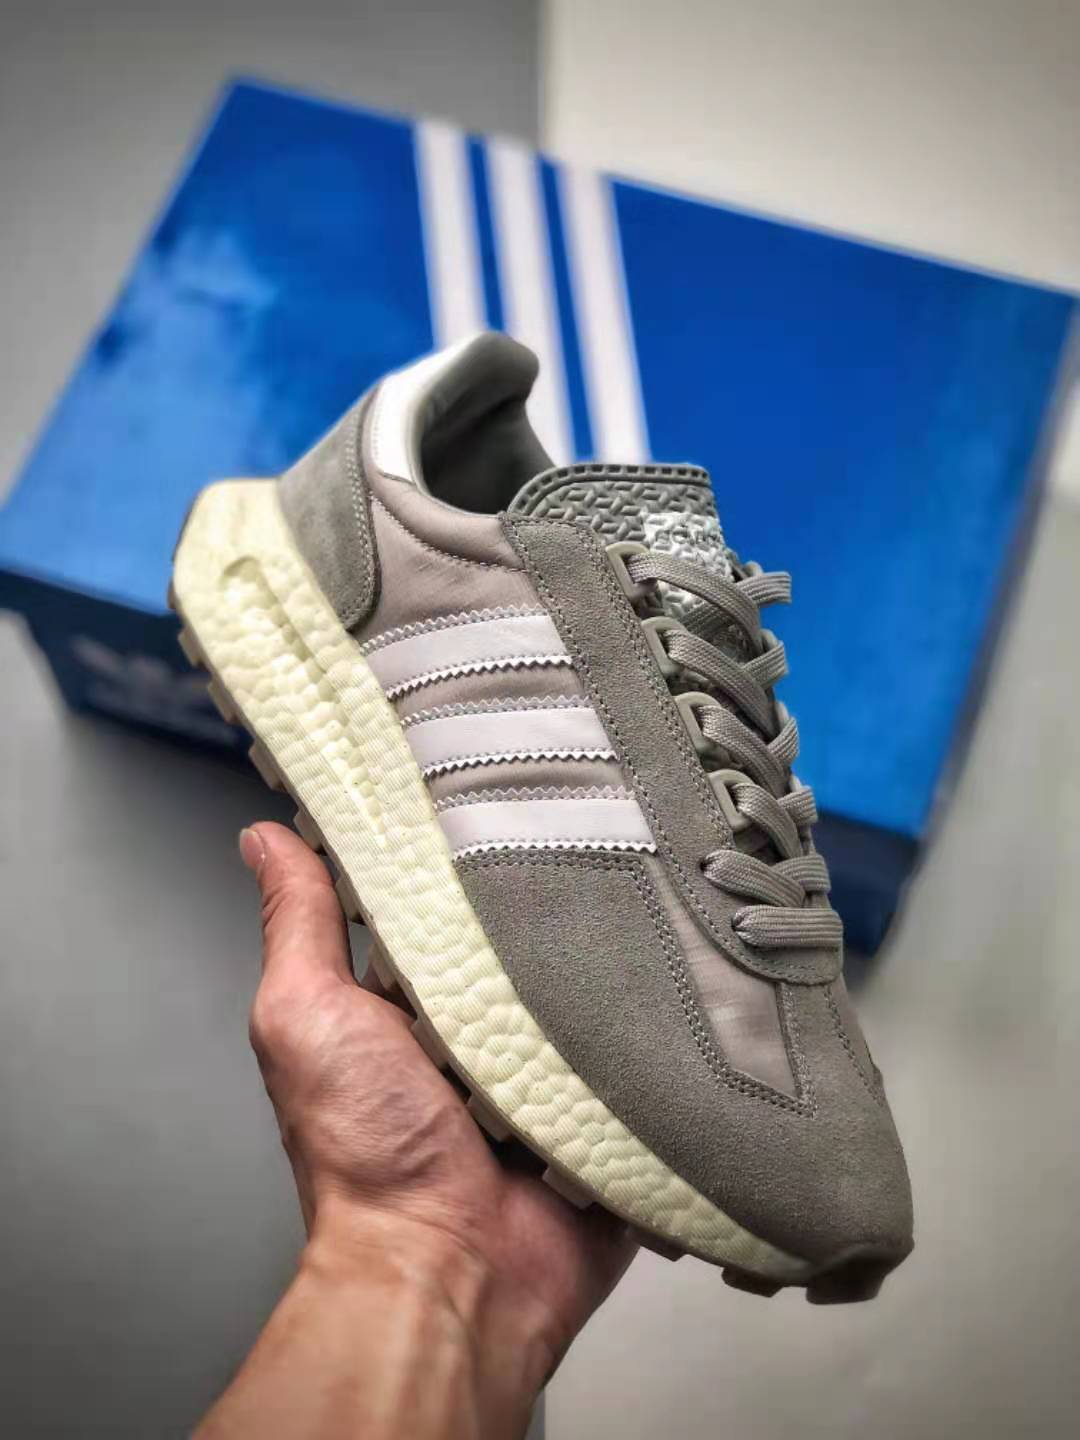 Adidas Retropy E5 Solid Grey Q47101 - Classic Style with Modern Comfort